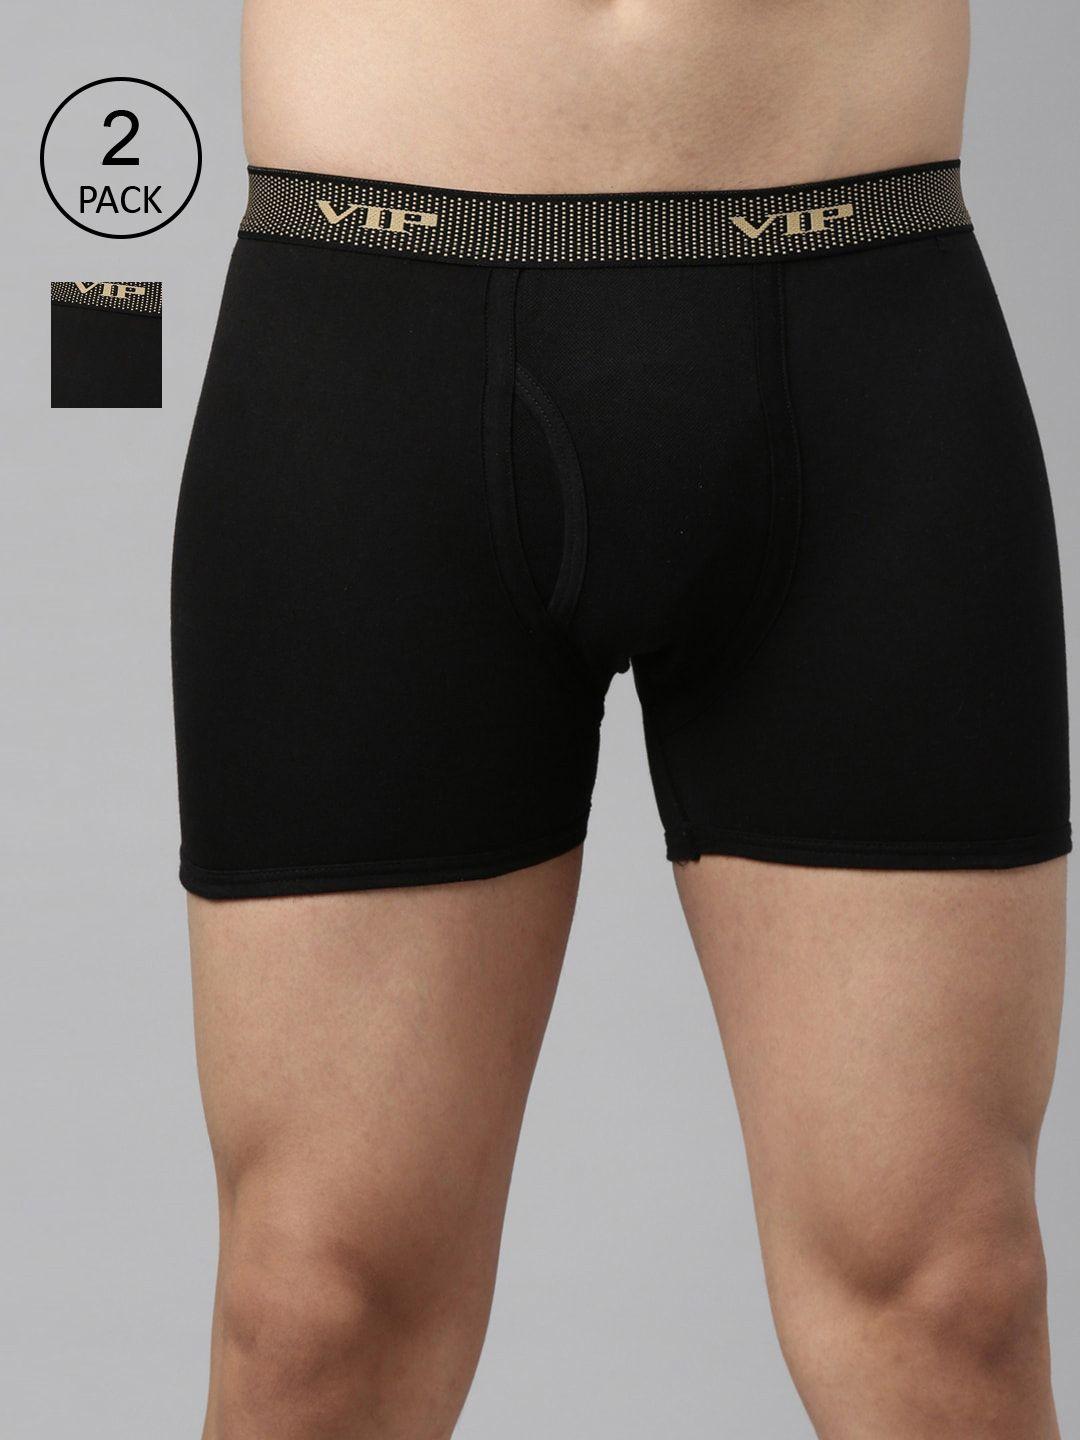 vip men pack of 2 assorted pure cotton trunks